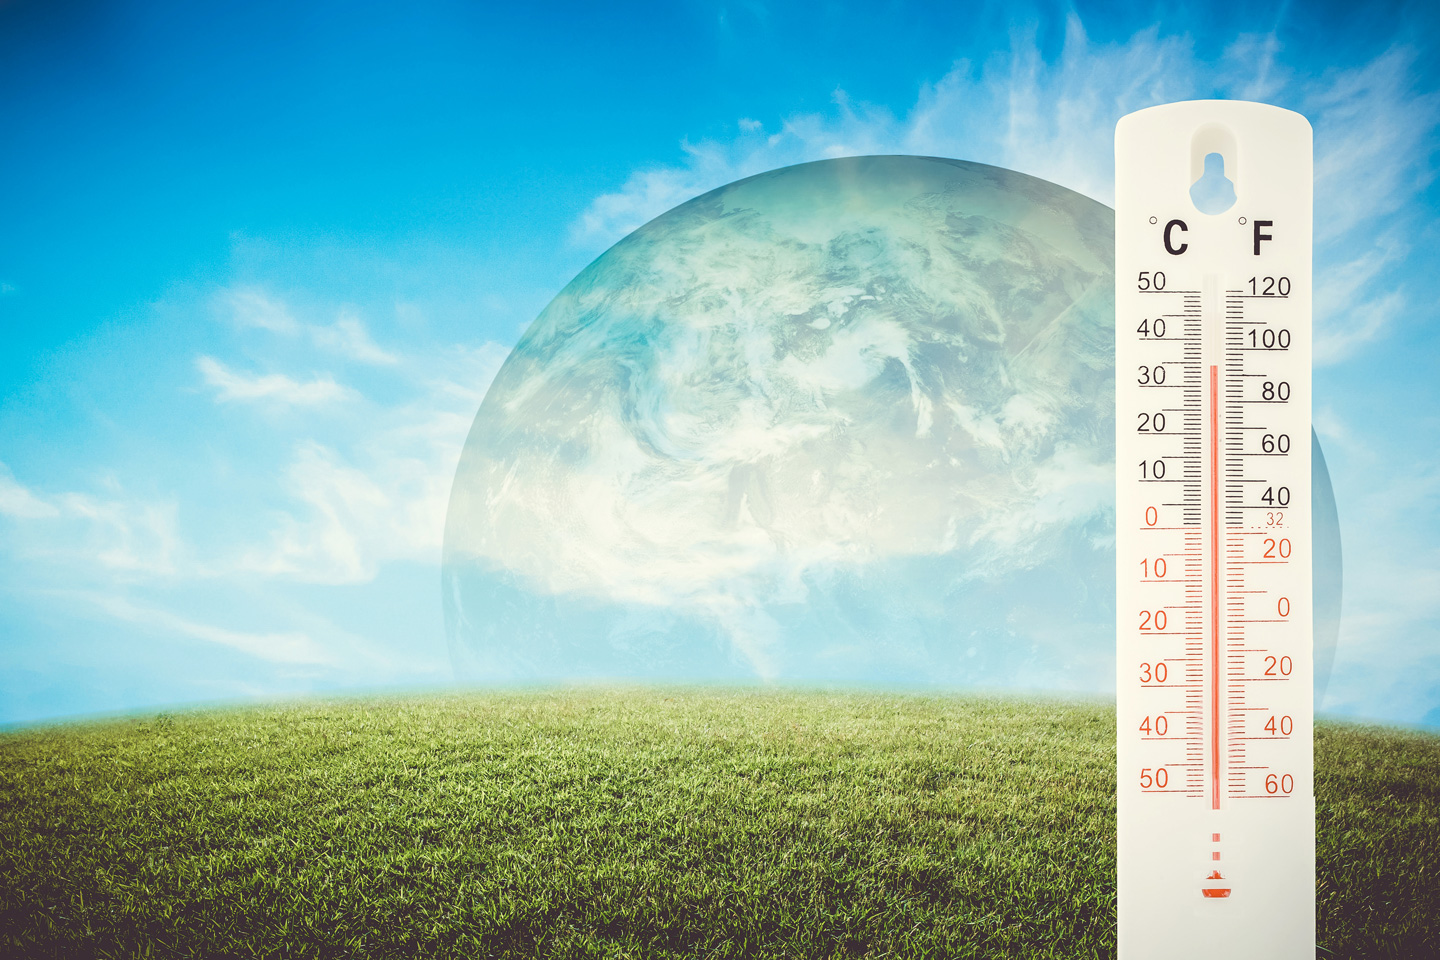 A green field and blue sky with clouds with a superimposed image of the earth in the background and a thermometer showing a high temperature in the foreground